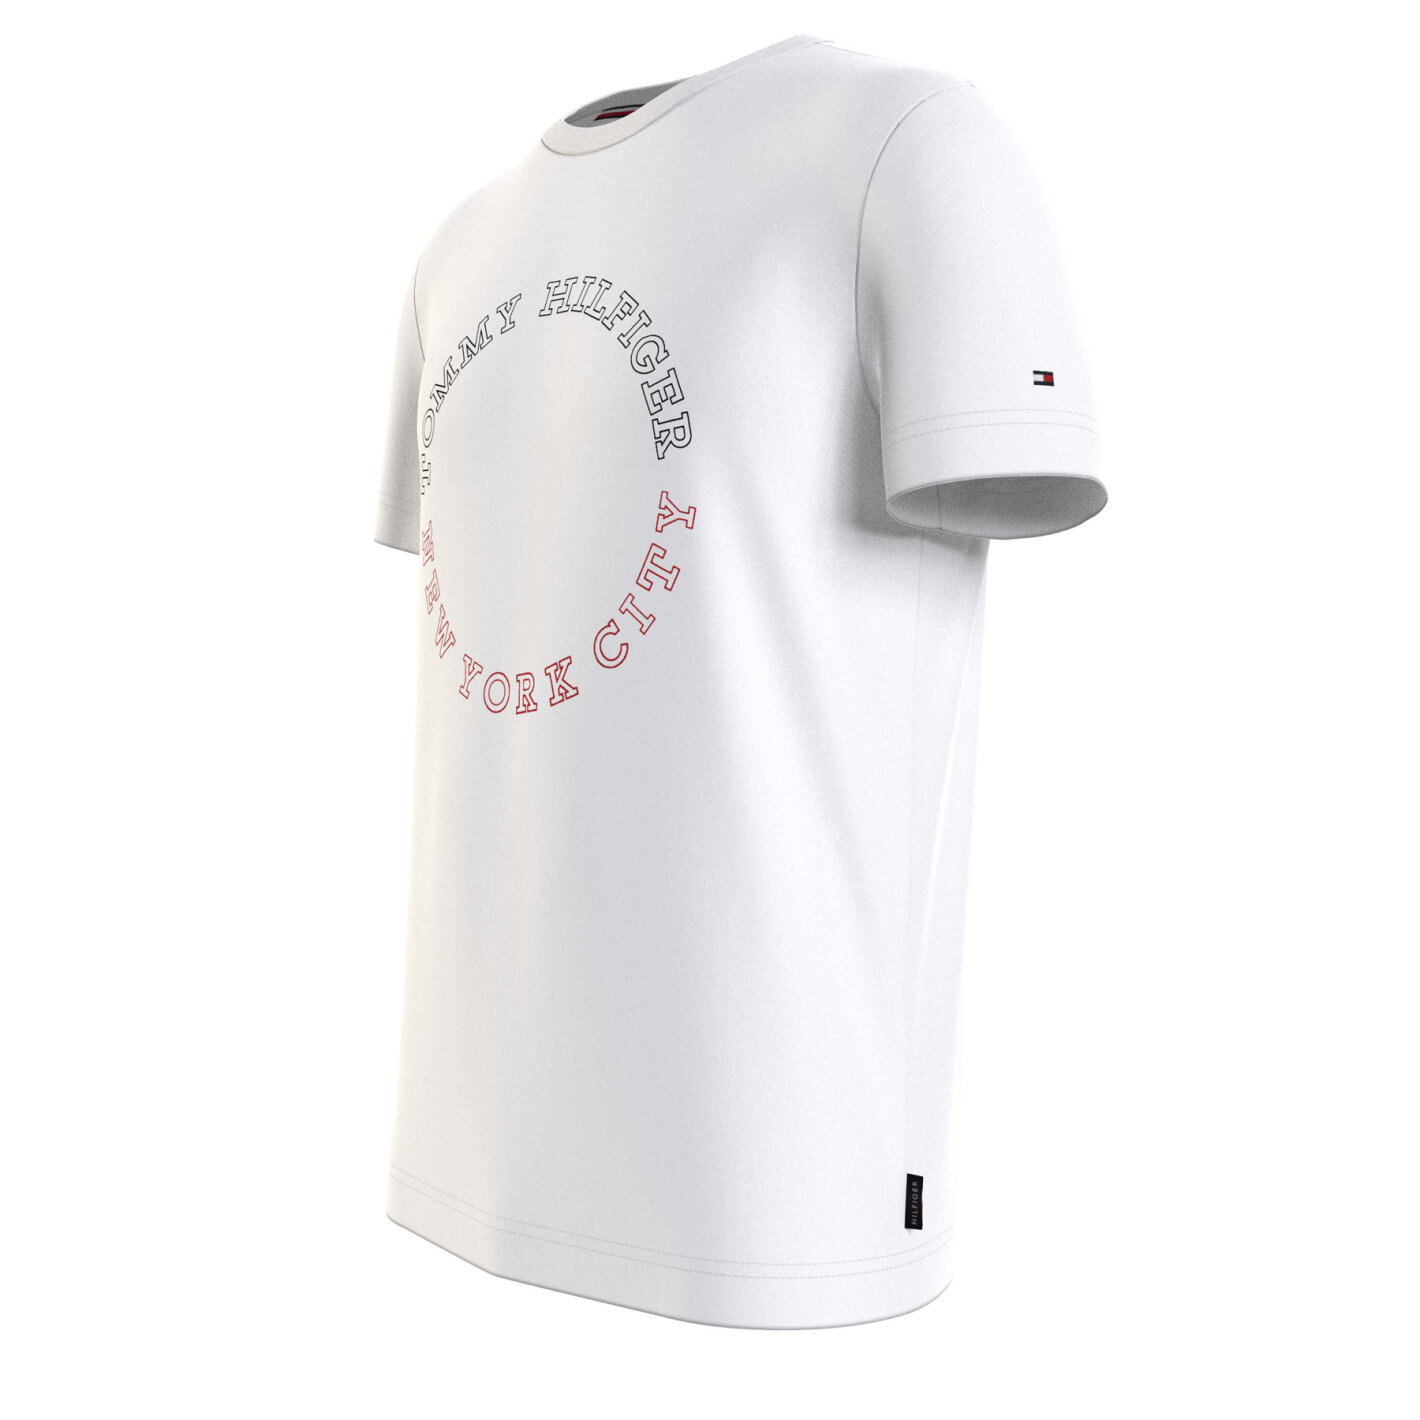 Fragt T-shirt tee TH Tommy roundle monotype Fri Hilfiger White -